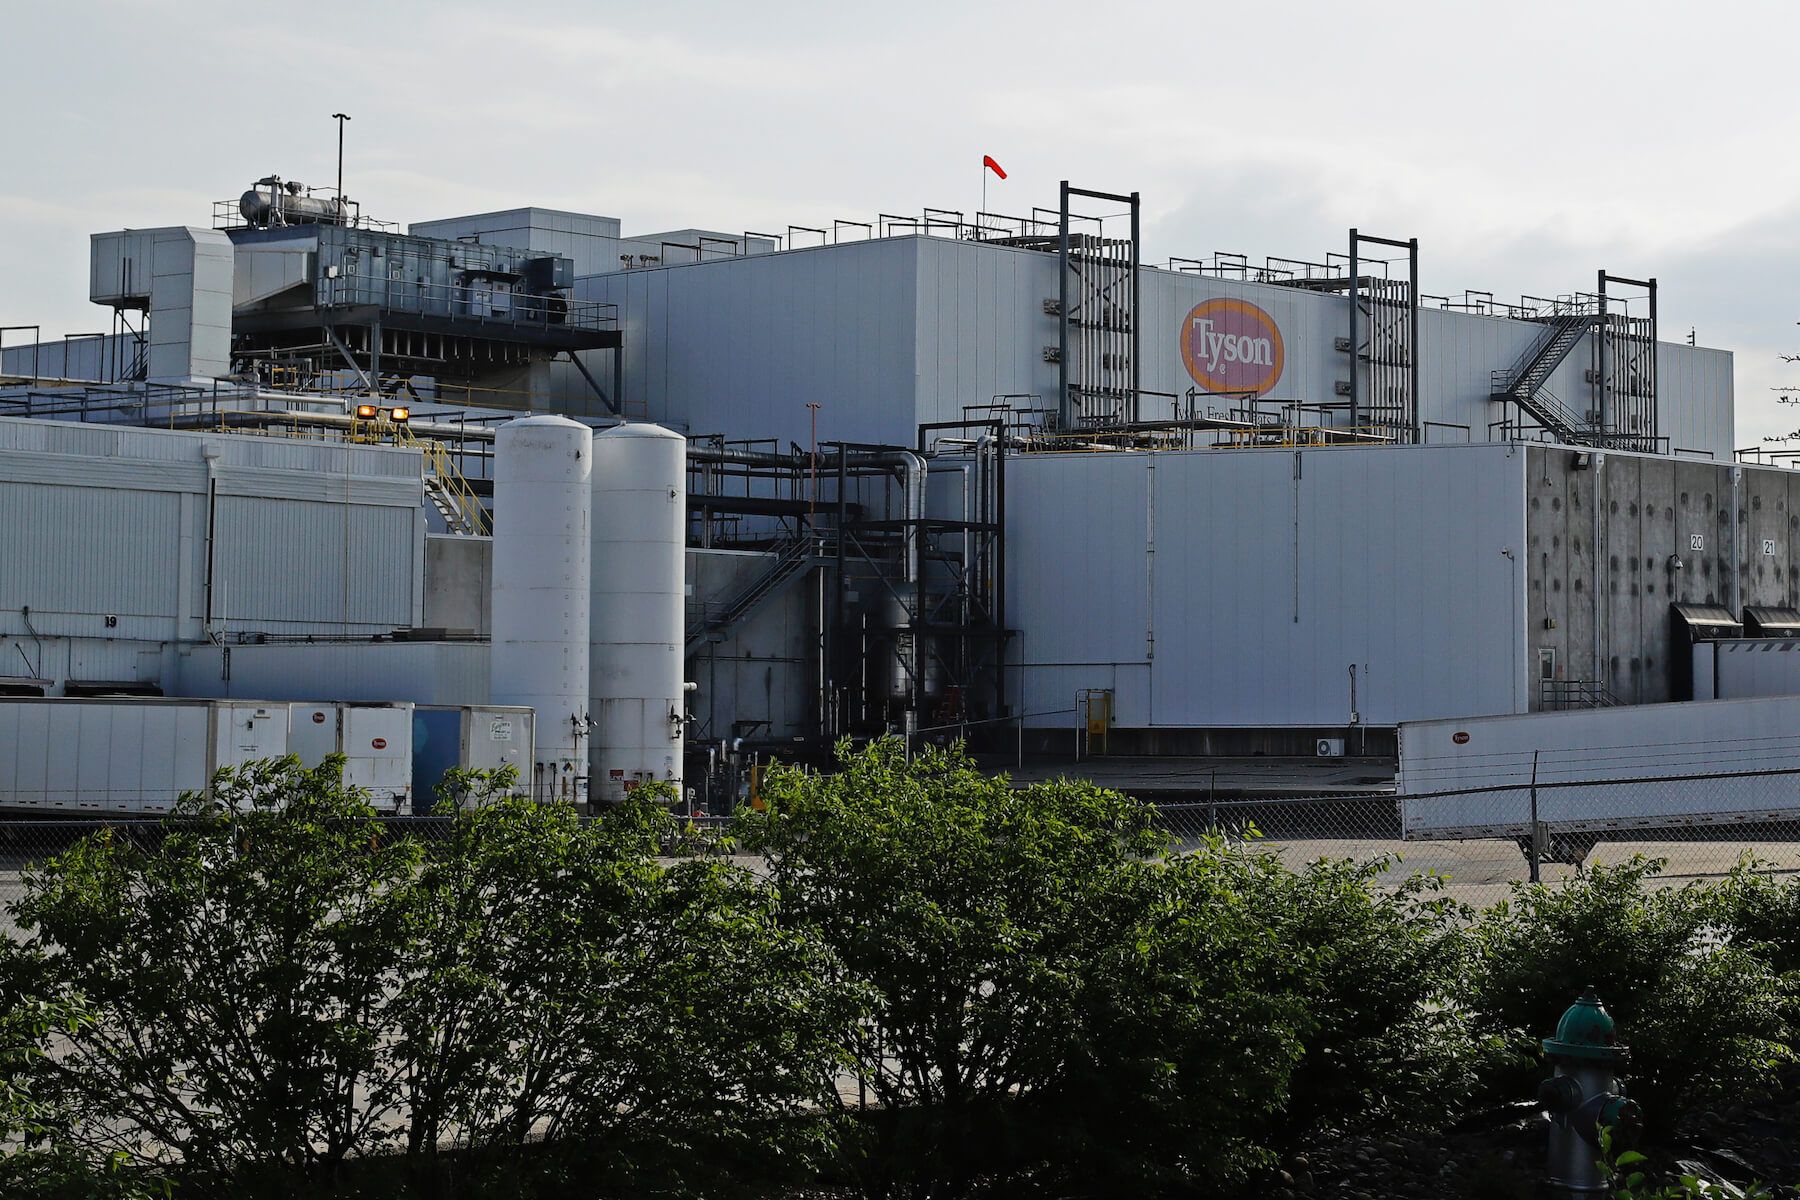 A Tyson plant in Emporia Kansas, during the Covid-19 pandemic (May 2020)